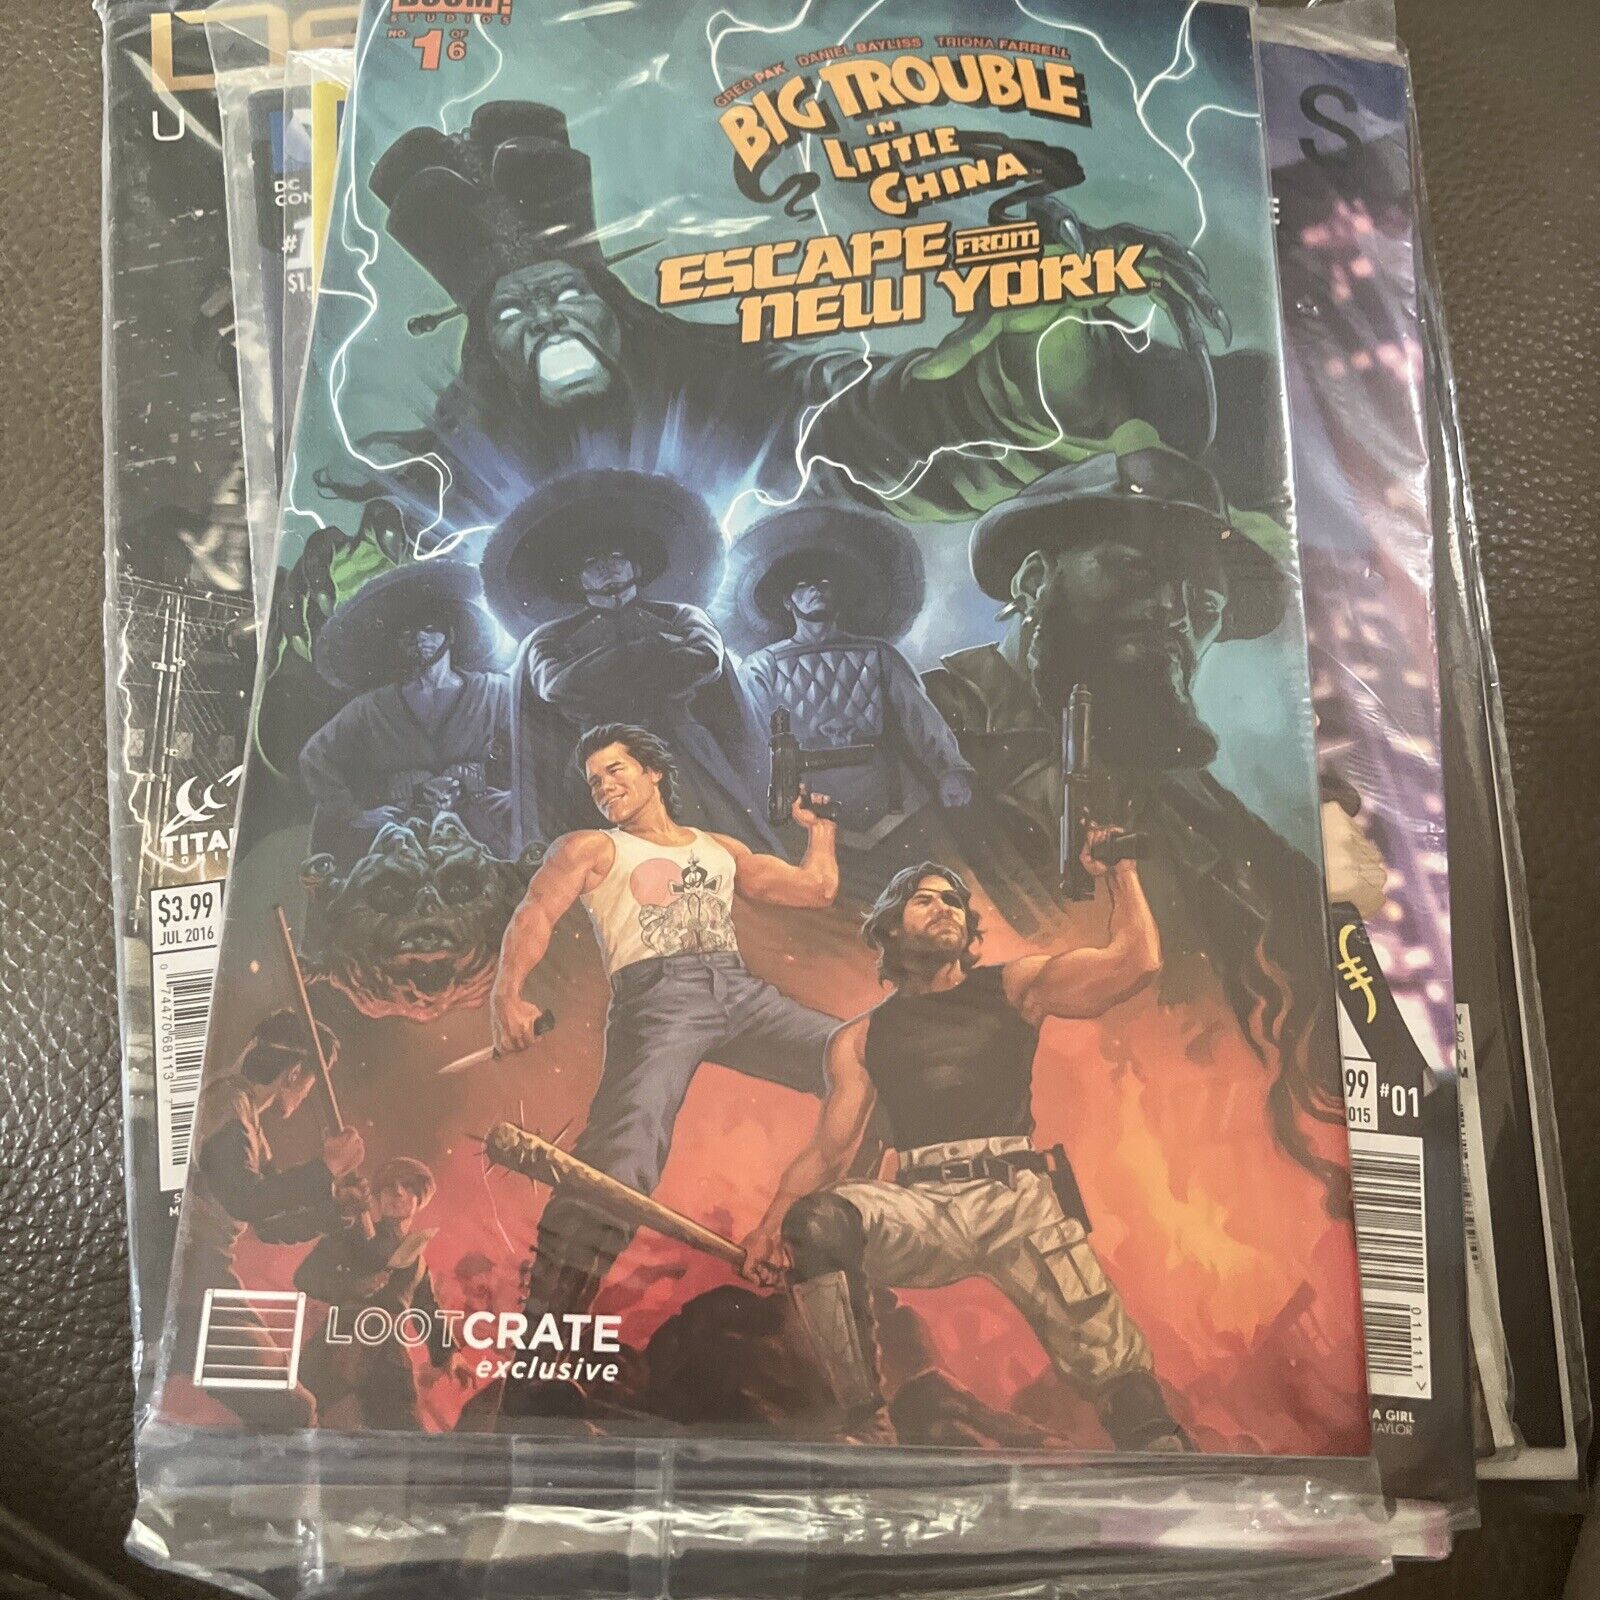 Big Trouble in Little China /-Loot Crate Exclusive And Six Other Comics